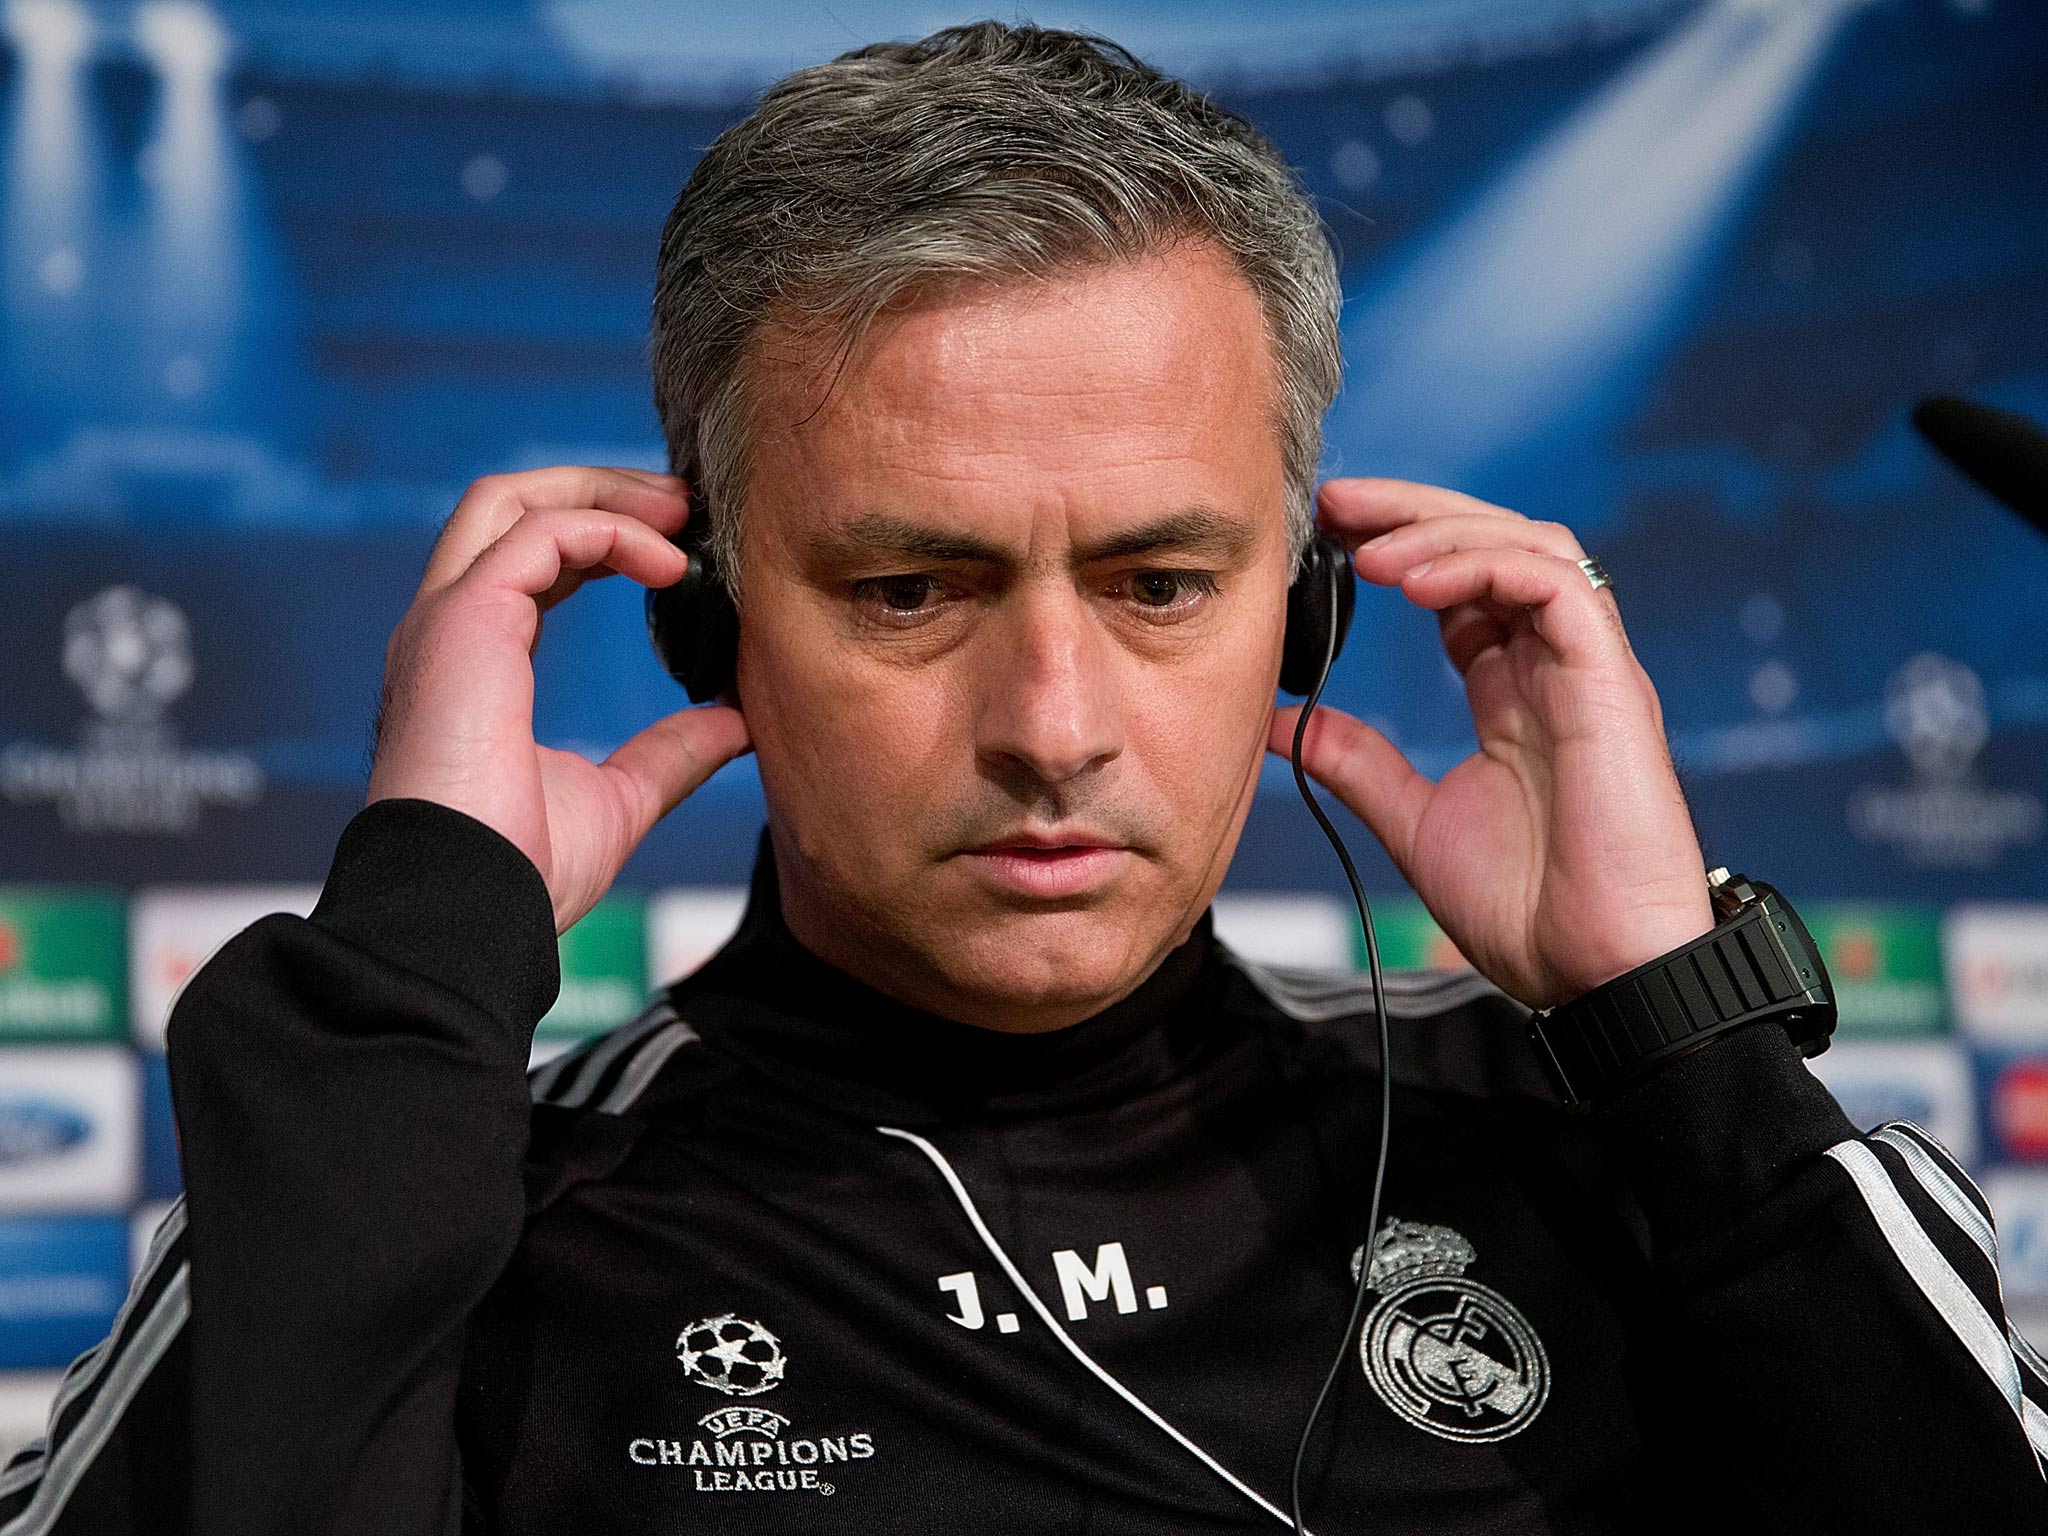 Real Madrid boss Jose Mourinho speaks to the media ahead of a Champions League tie with Galatasaray